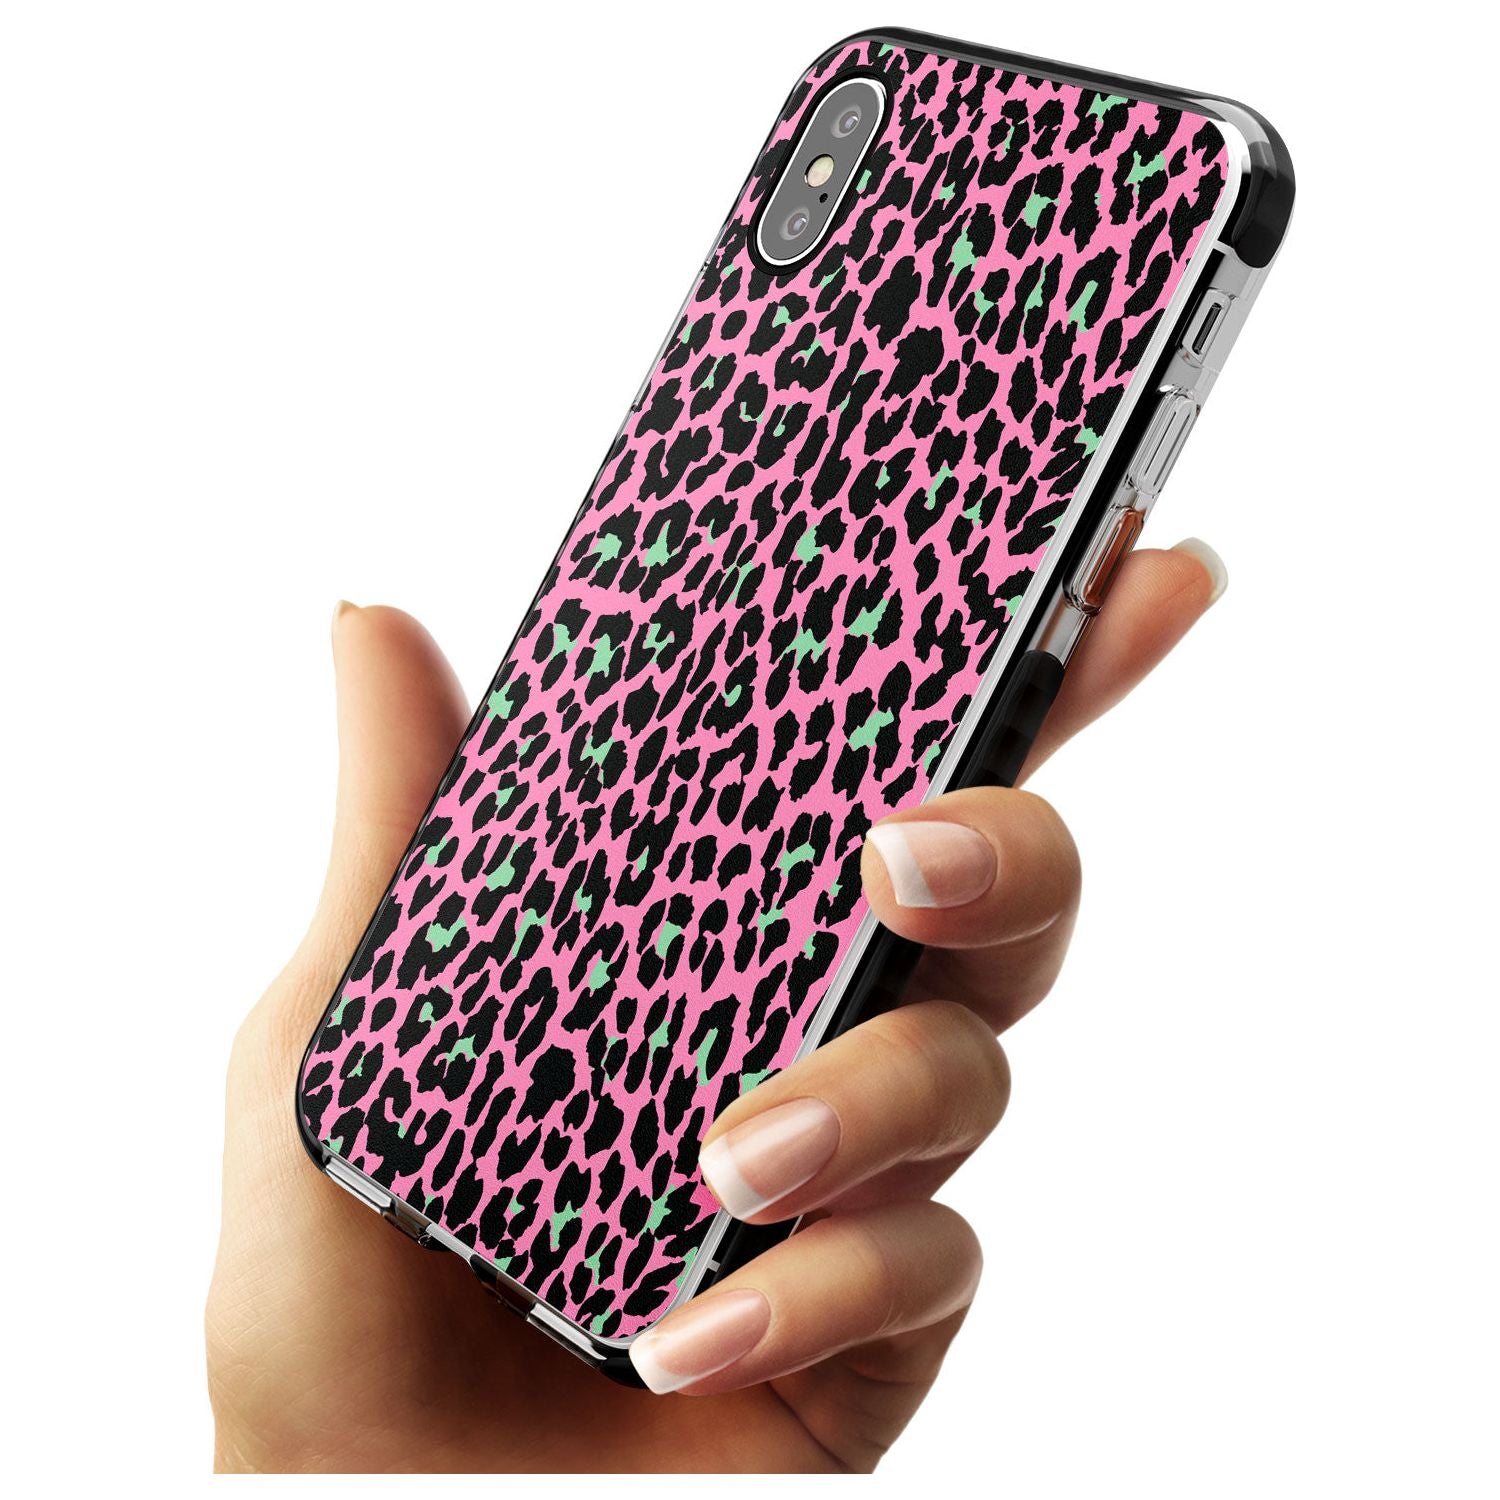 Green on Pink Leopard Print Pattern Black Impact Phone Case for iPhone X XS Max XR